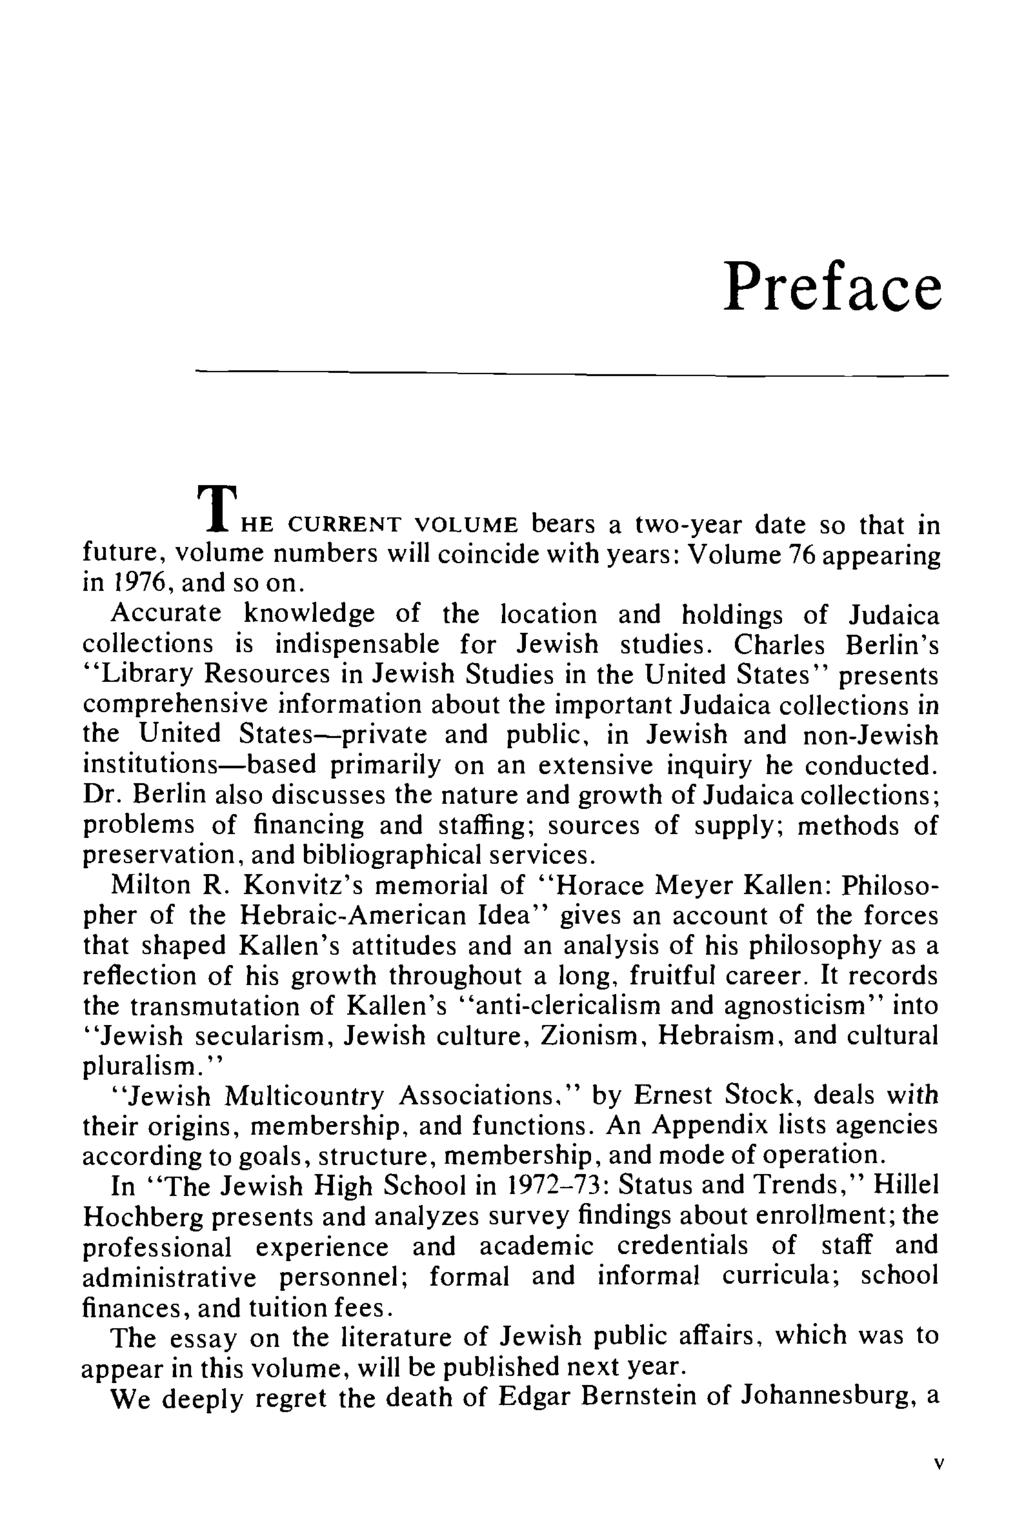 Preface J. HE CURRENT VOLUME bears a two-year date so that in future, volume numbers will coincide with years: Volume 76 appearing in 1976, and soon.